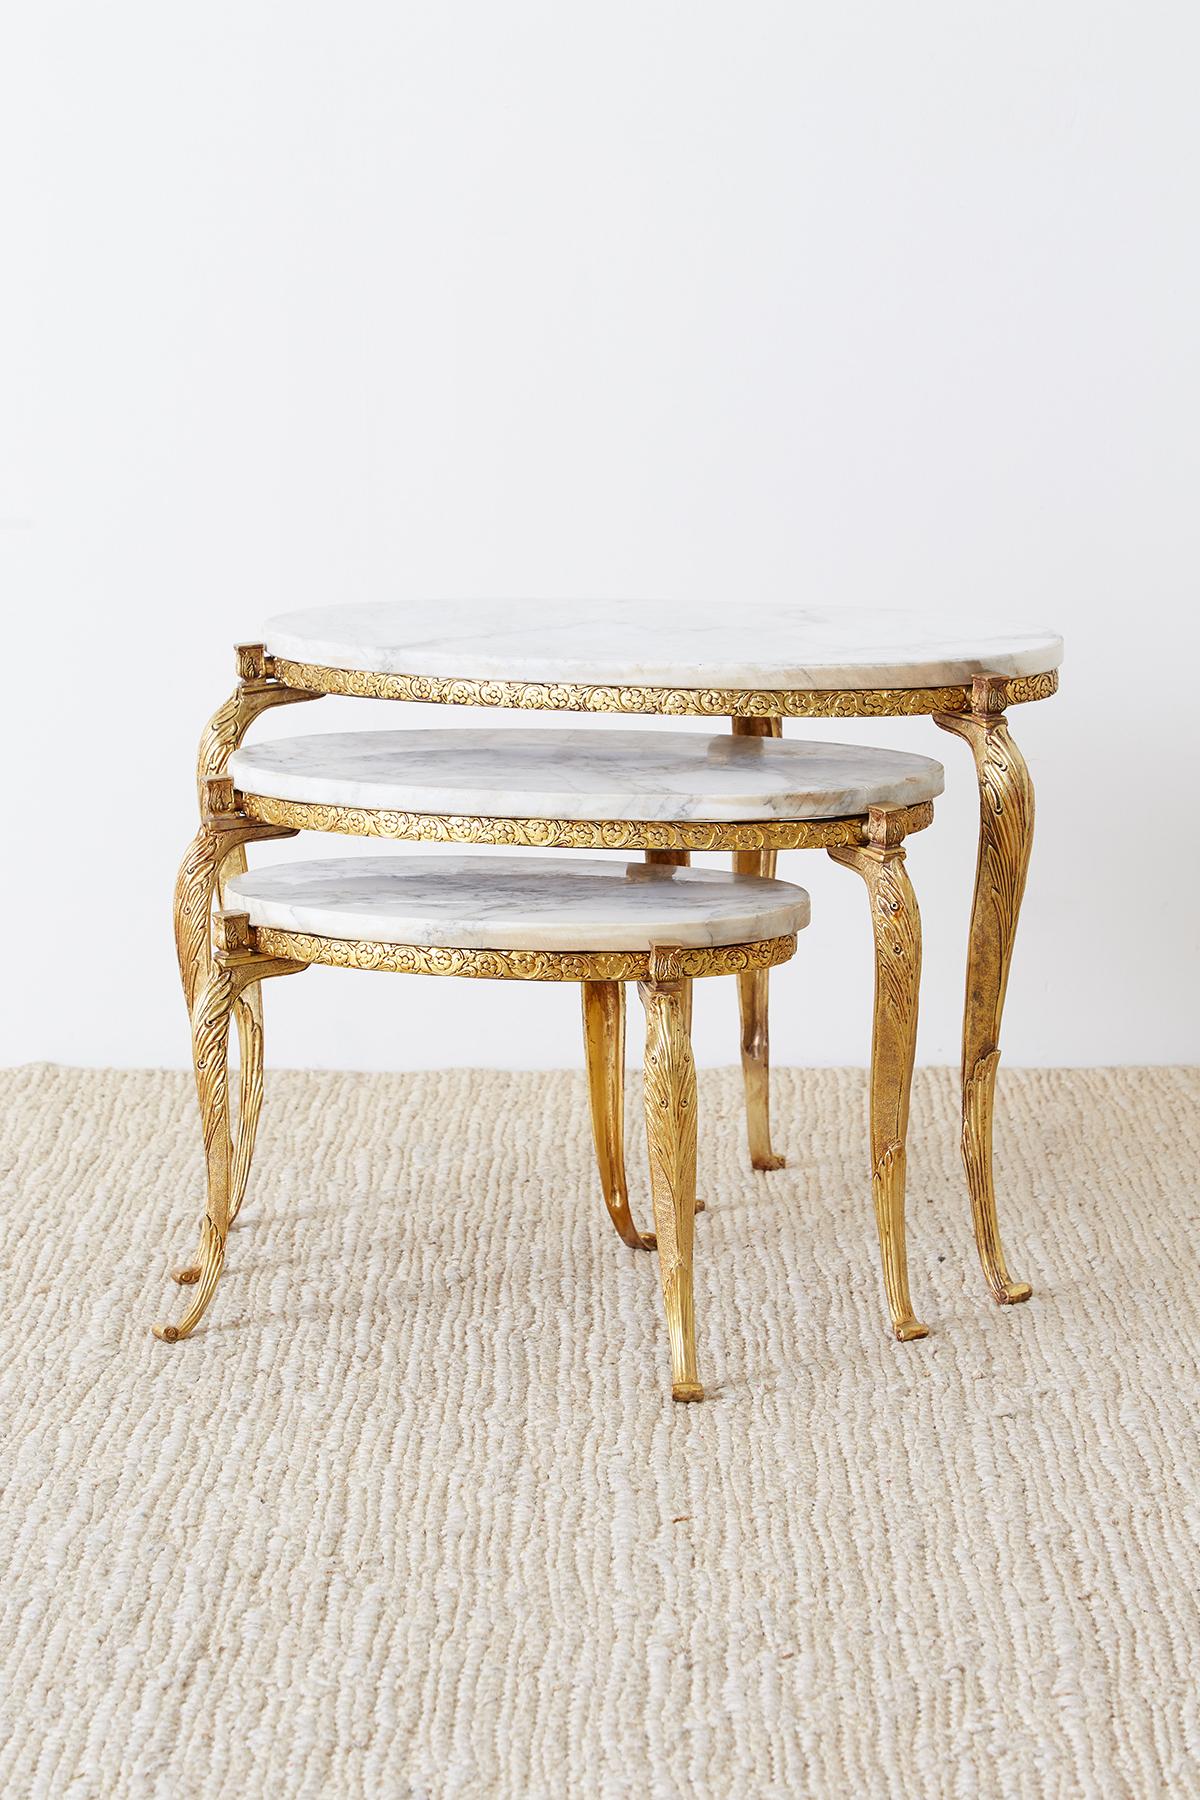 Extraordinary nest of three Italian drinks tables featuring oval Carrara marble tops. Supported by elegant Baroque style cabriole legs made of doré bronze. The three legs are attached to an iron ring with a decorative gilded bronze trim. Produced in